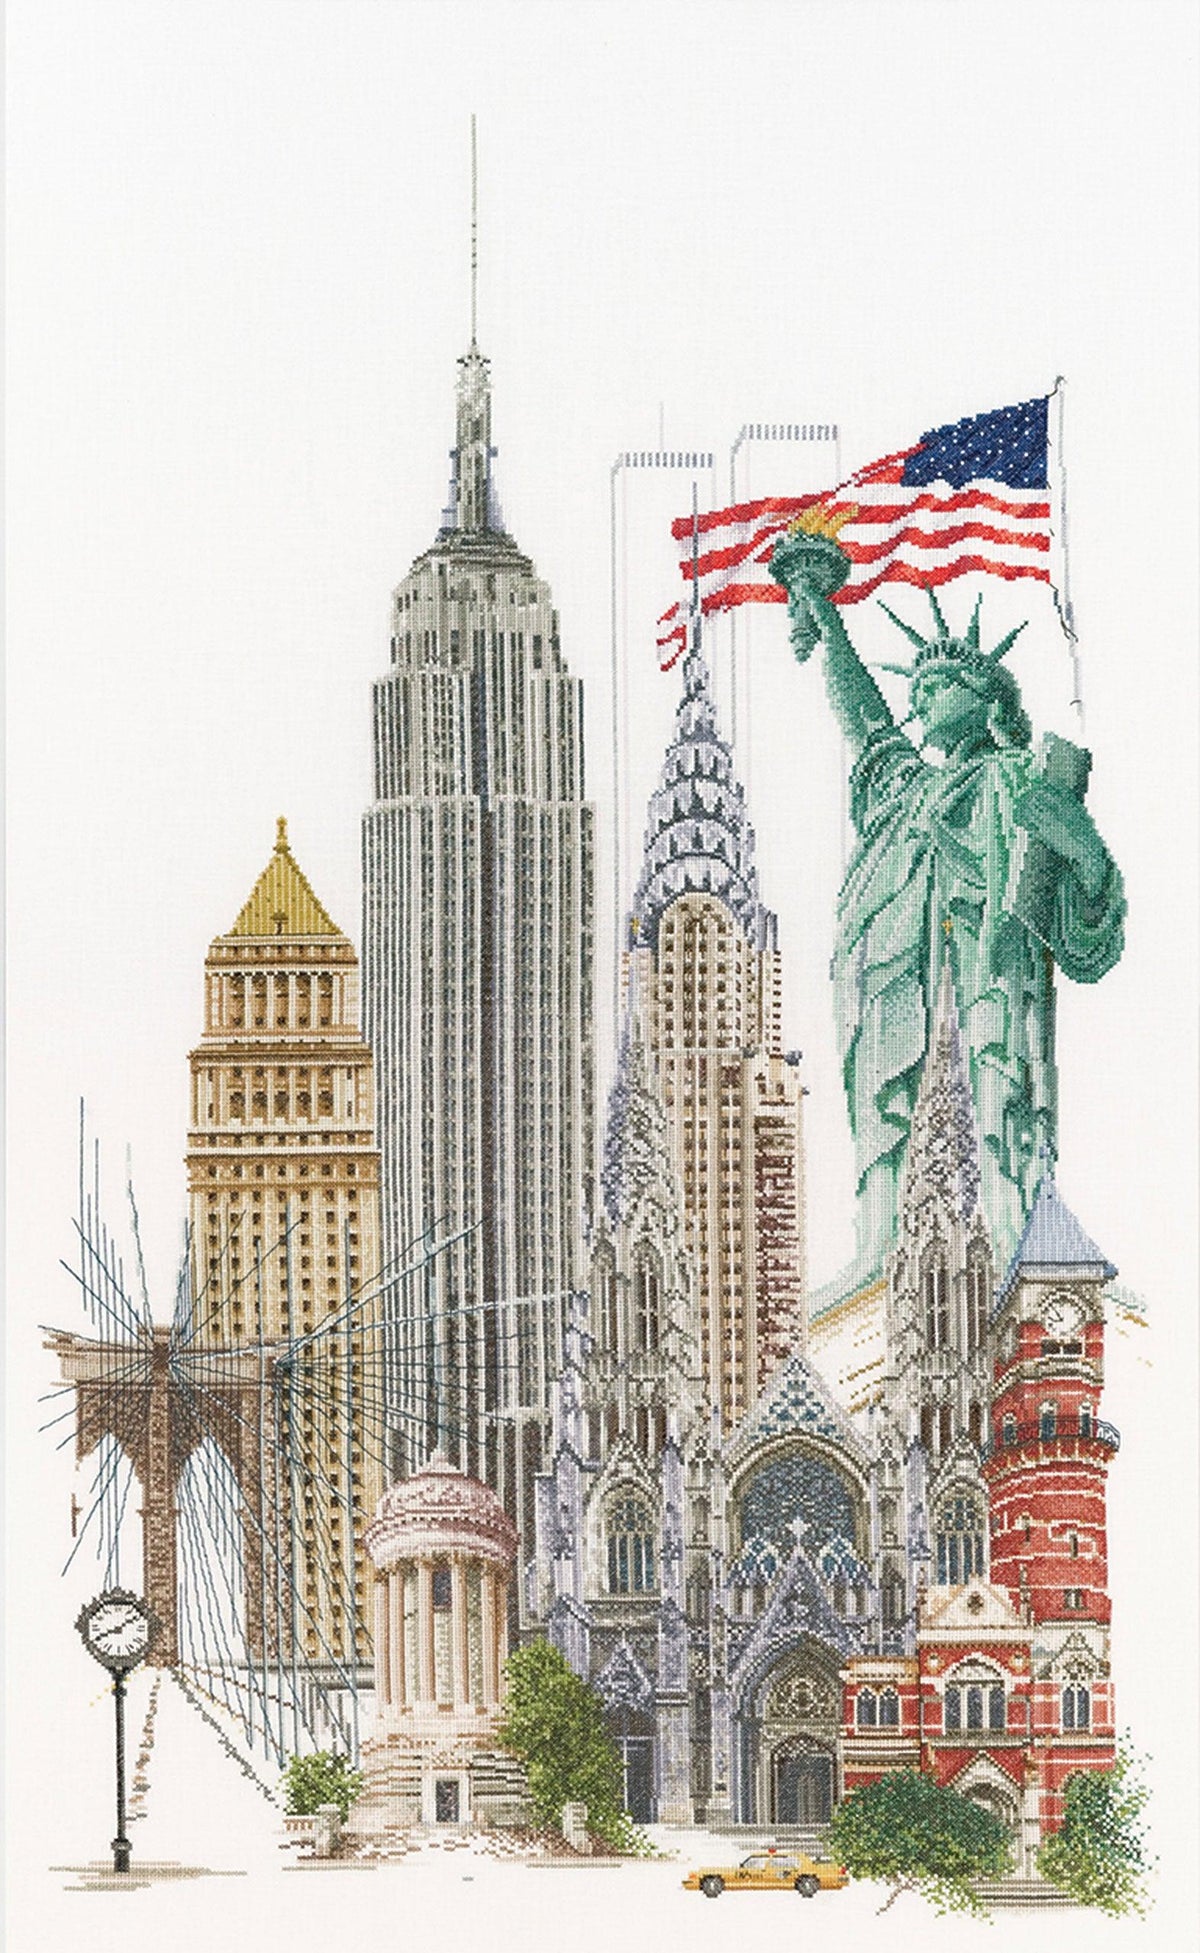 Thea Gouverneur - Counted Cross Stitch Kit - New York - Aida - 18 count - 471A - Thea Gouverneur Since 1959